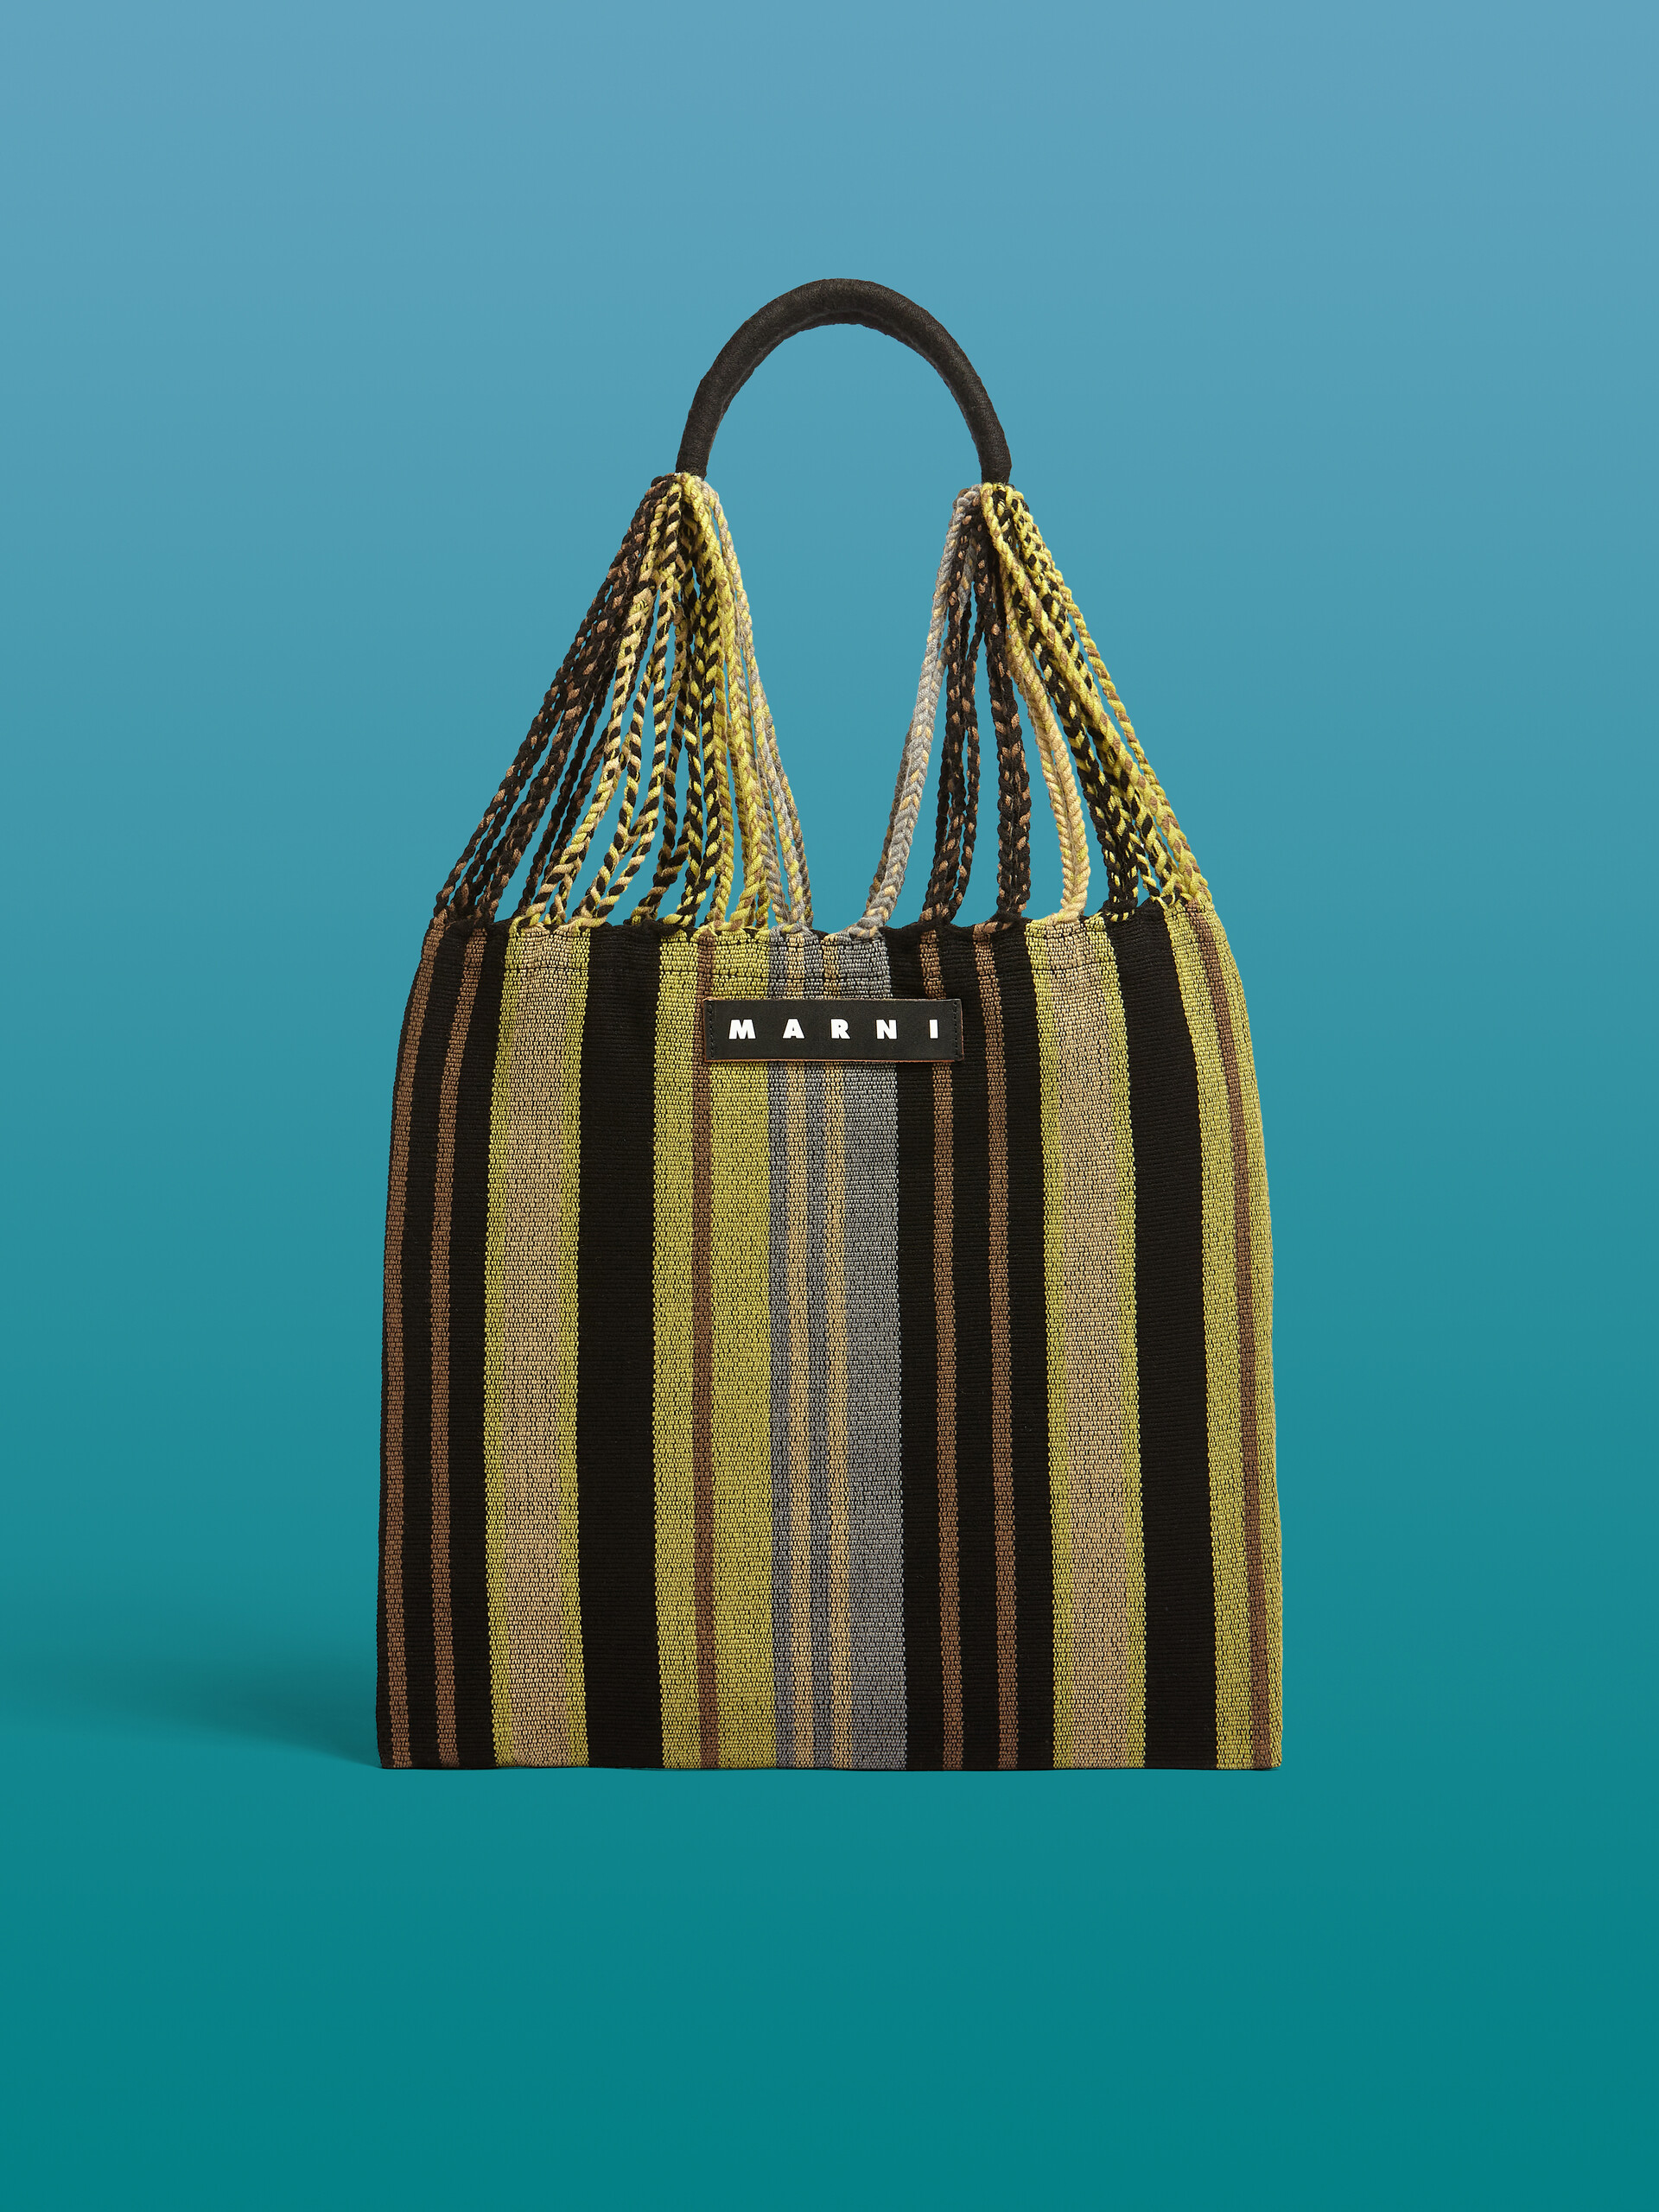 MARNI MARKET HAMMOCK bag in yellow multicolour polyester - Bags - Image 1